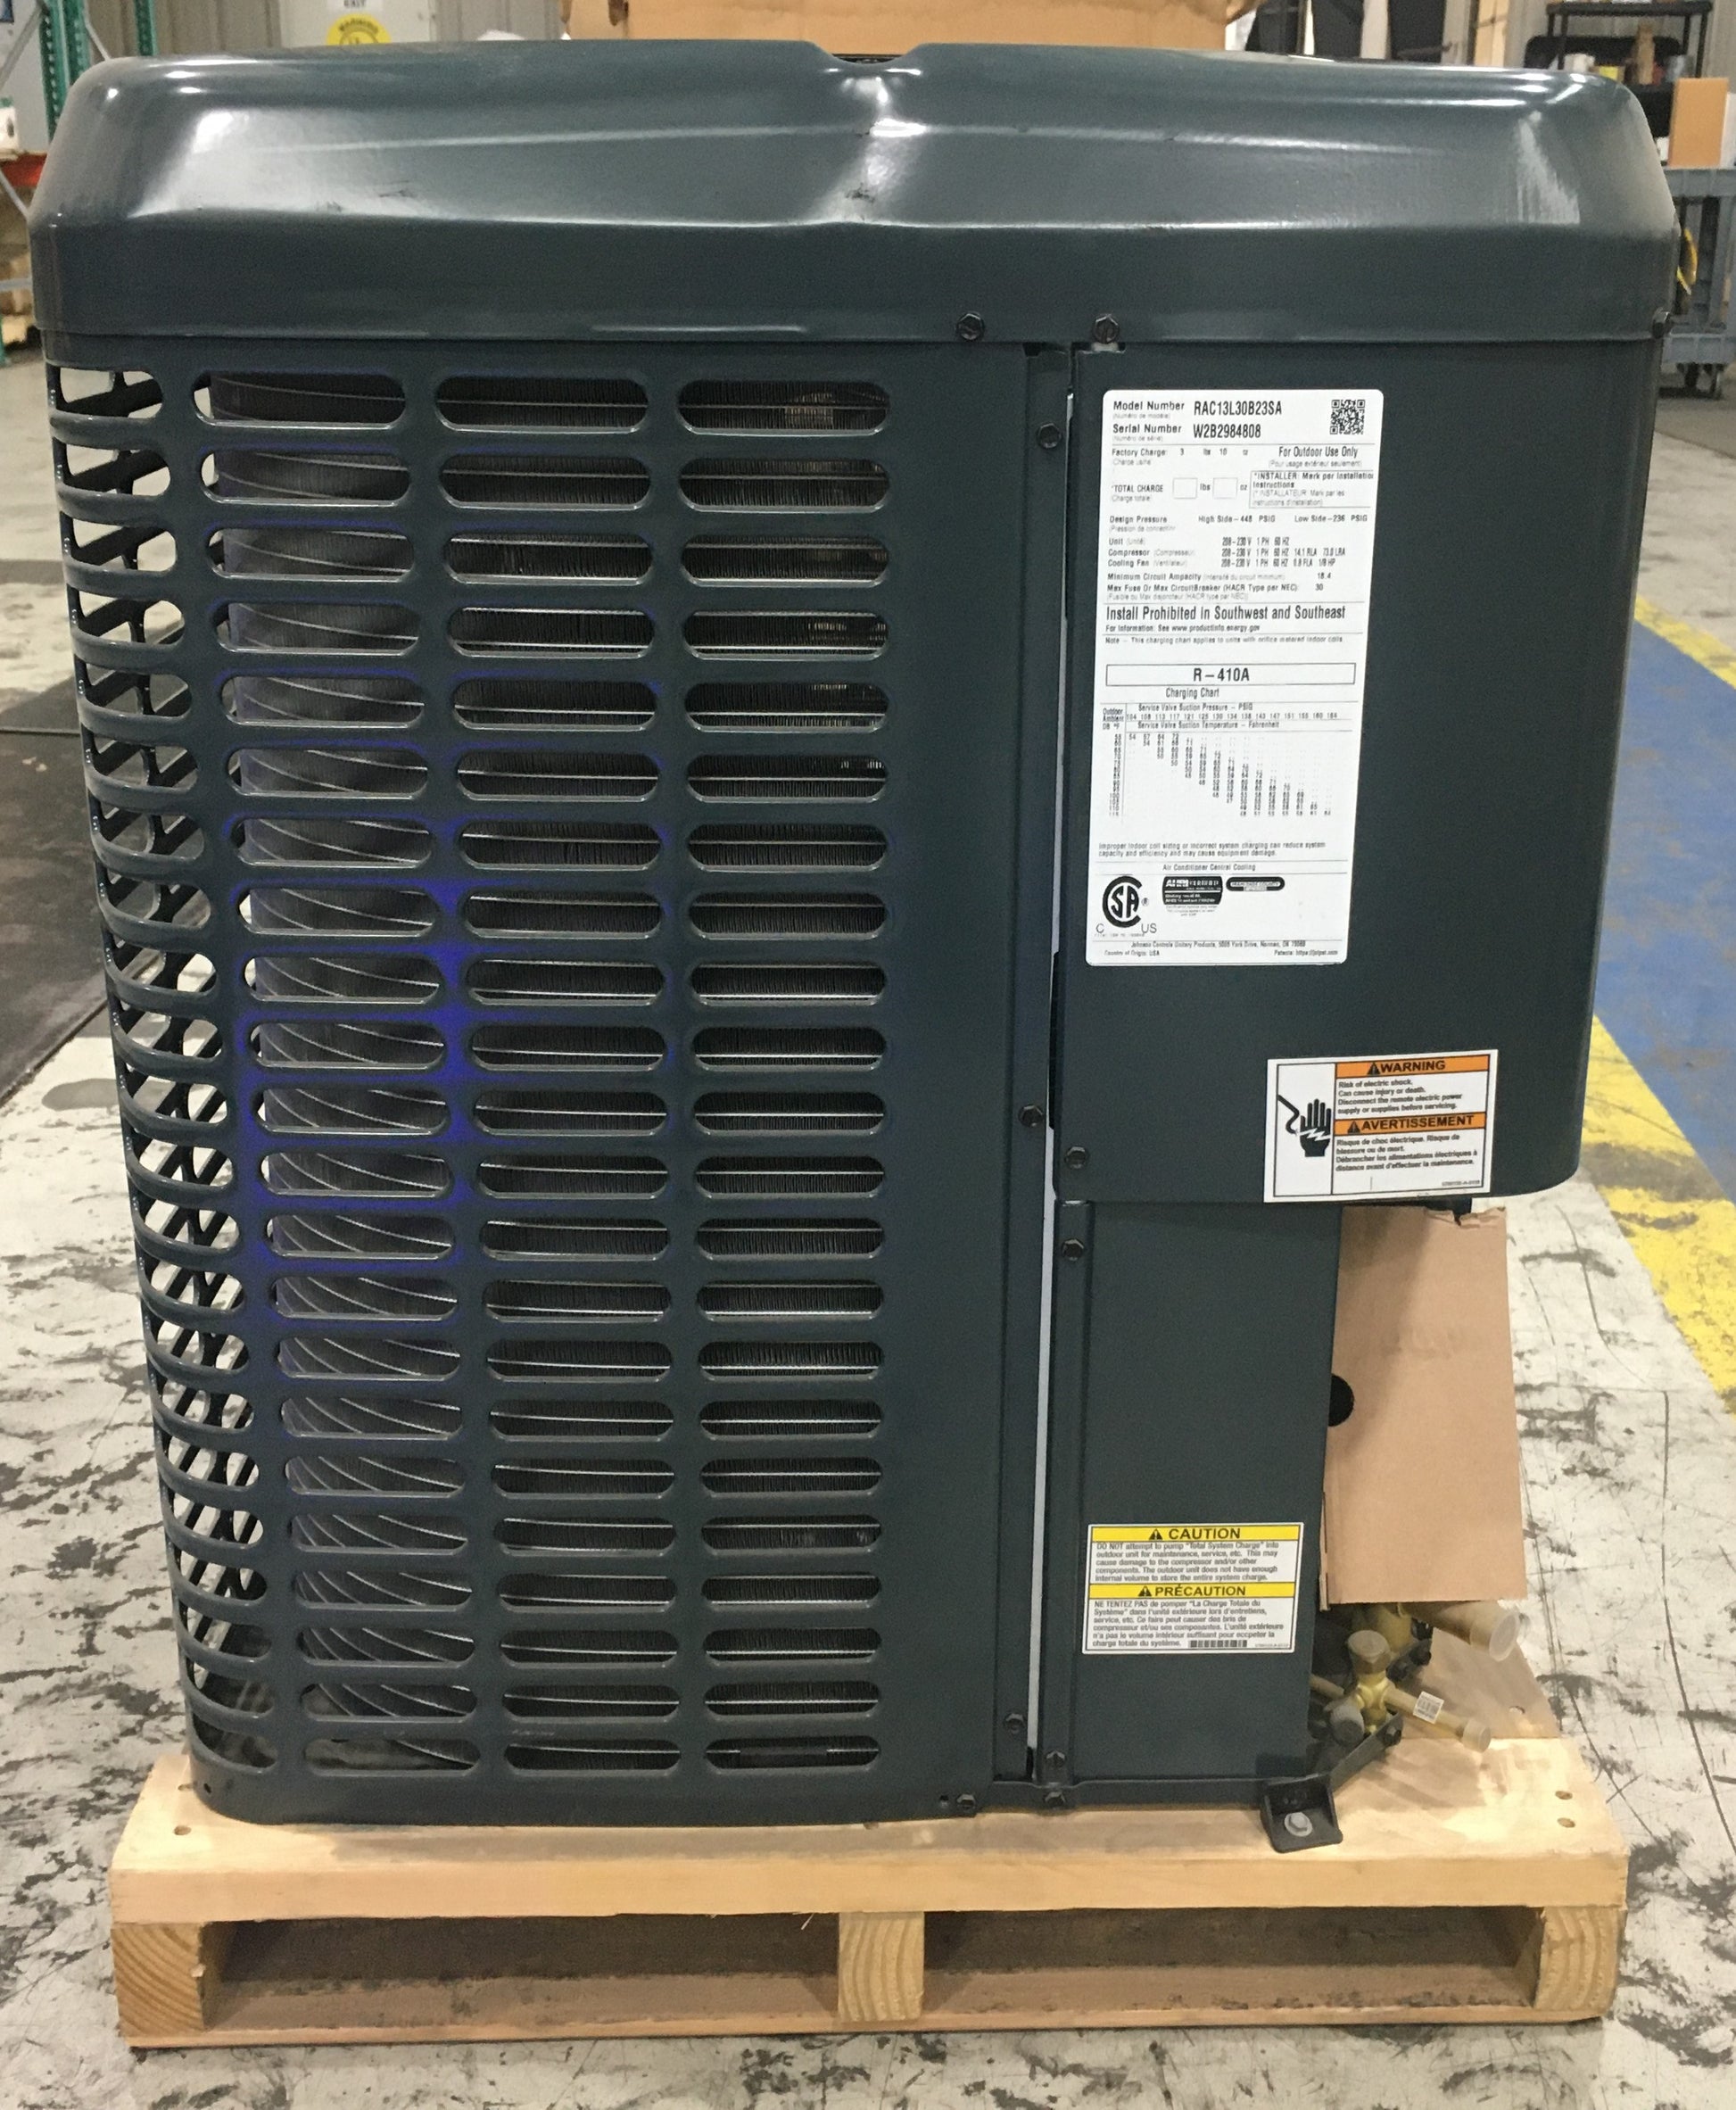 2 1/2 TON "LX" SERIES SINGLE STAGE SPLIT-SYSTEM AIR CONDITIONER, 13 SEER, 208-230/60/1  R-410A